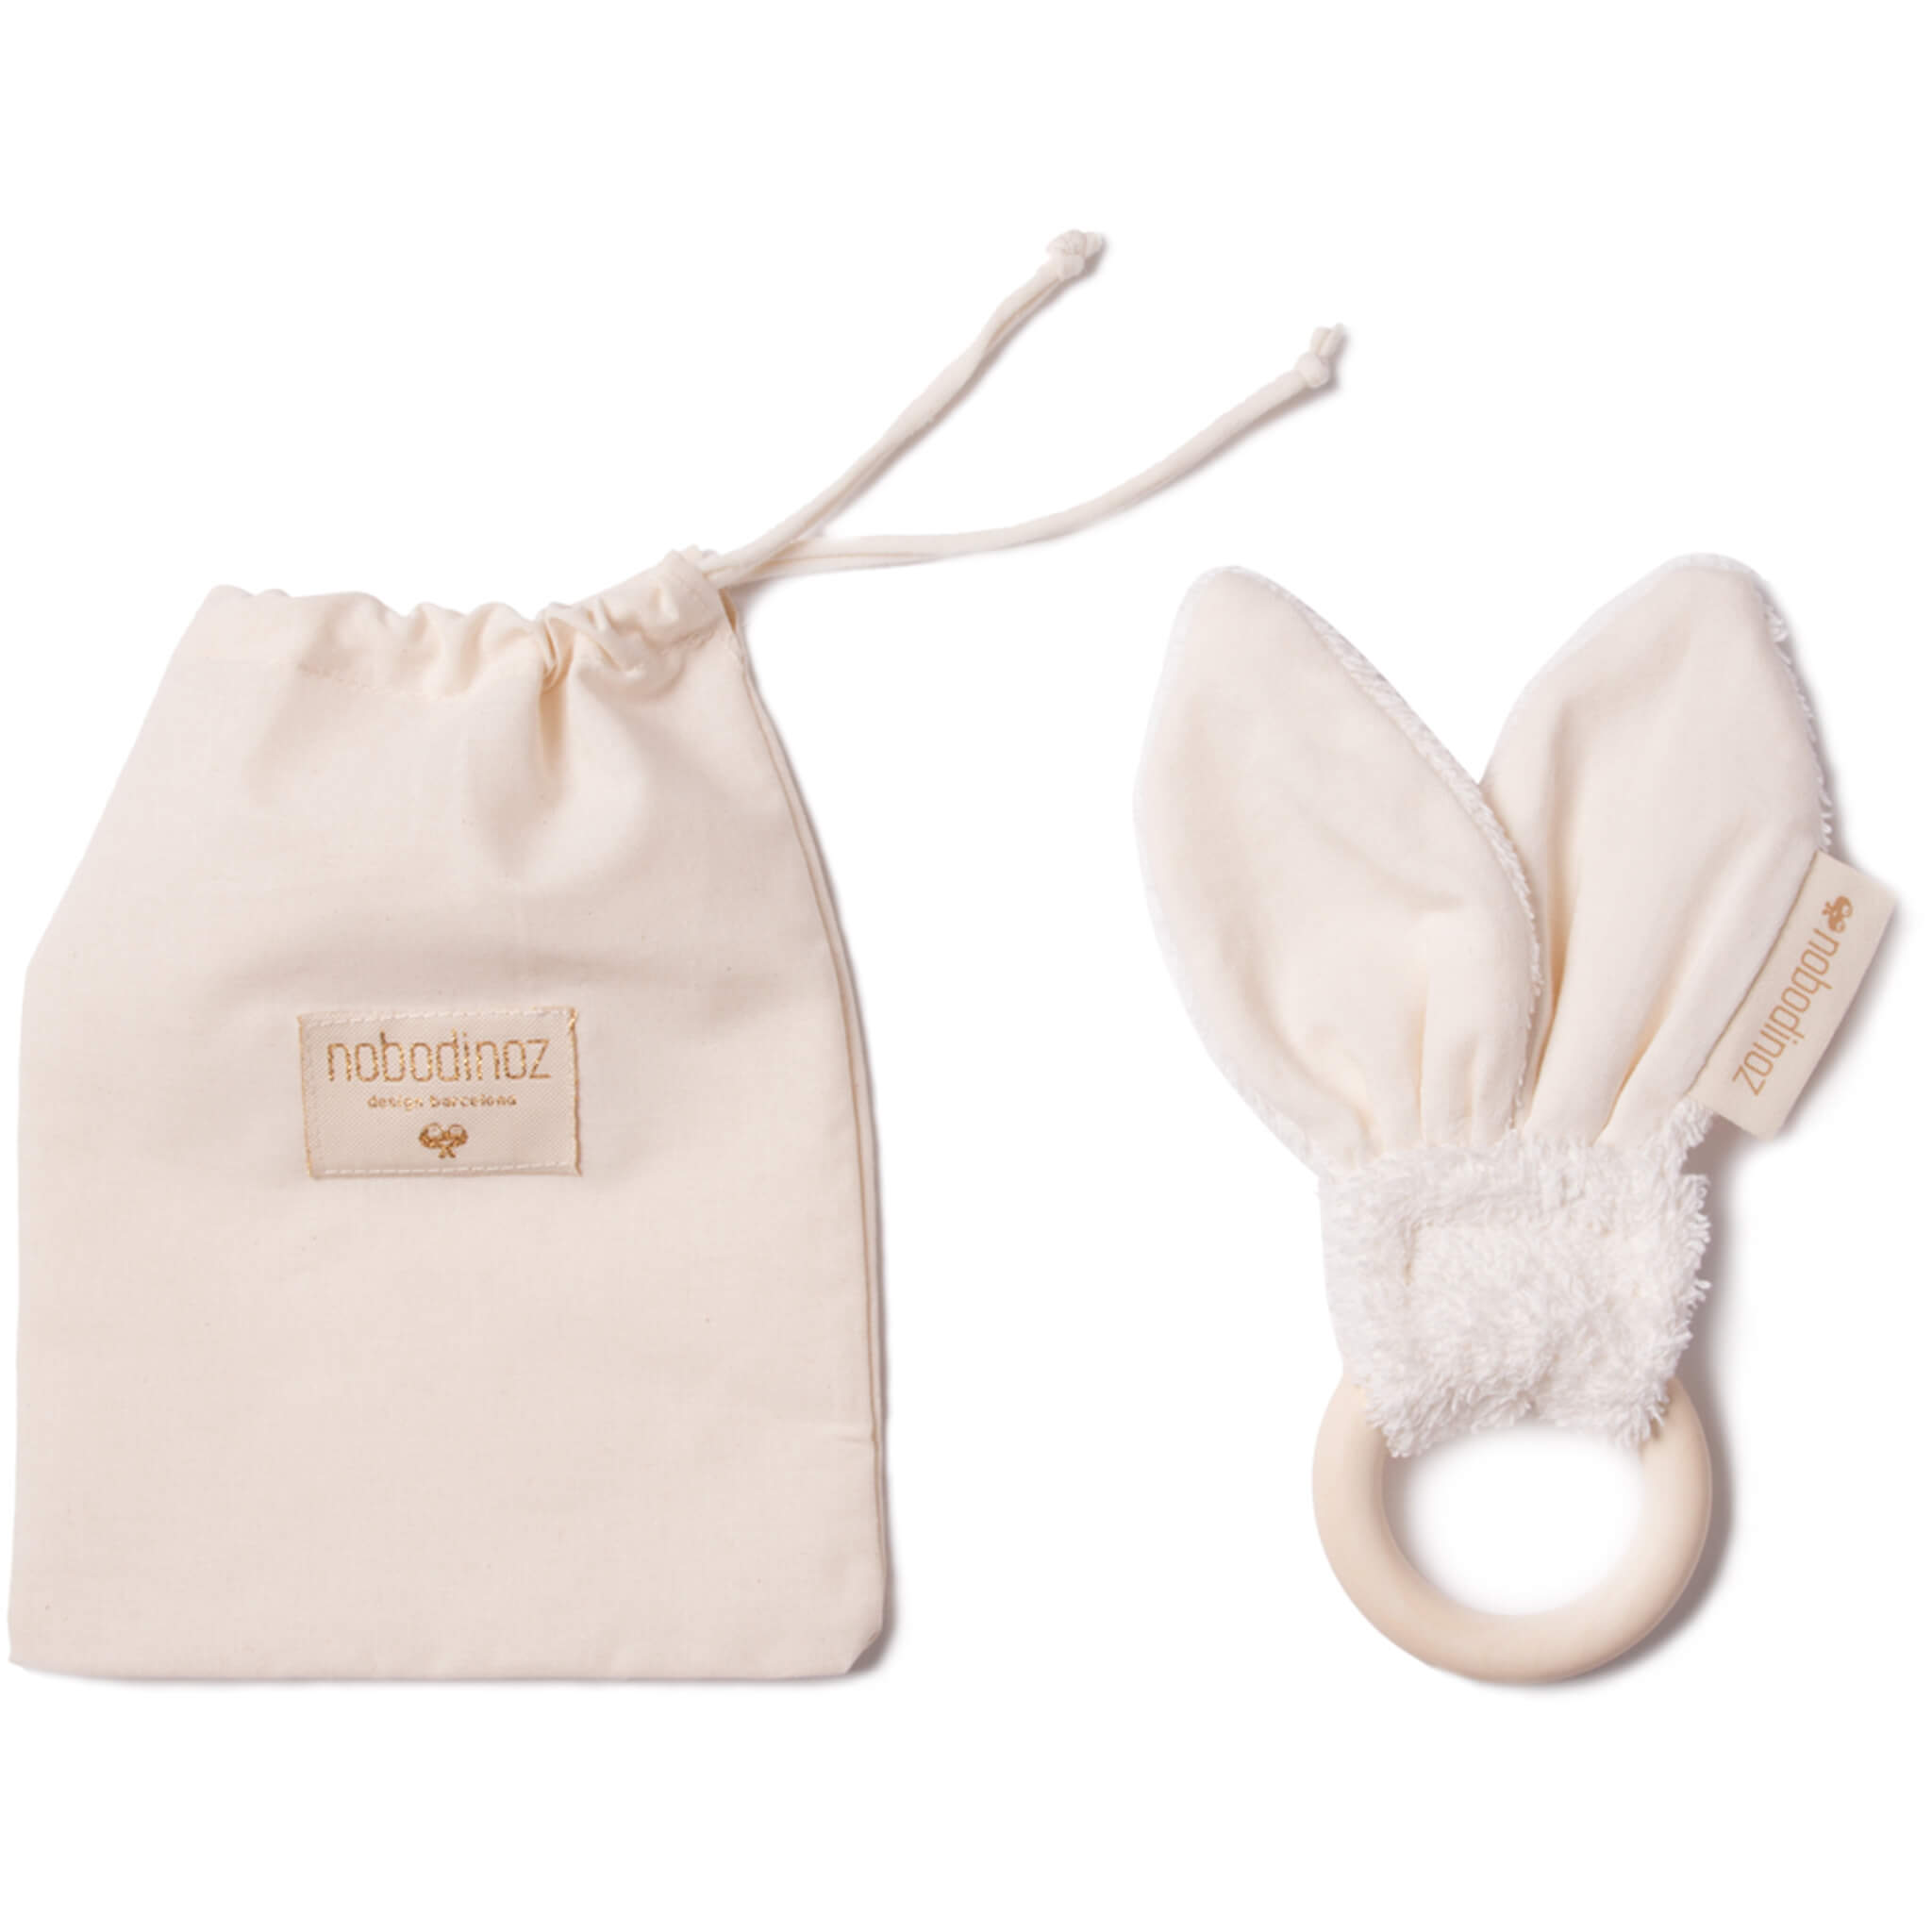 Nobodinoz Bunny Teething Ring in Natural with Bag